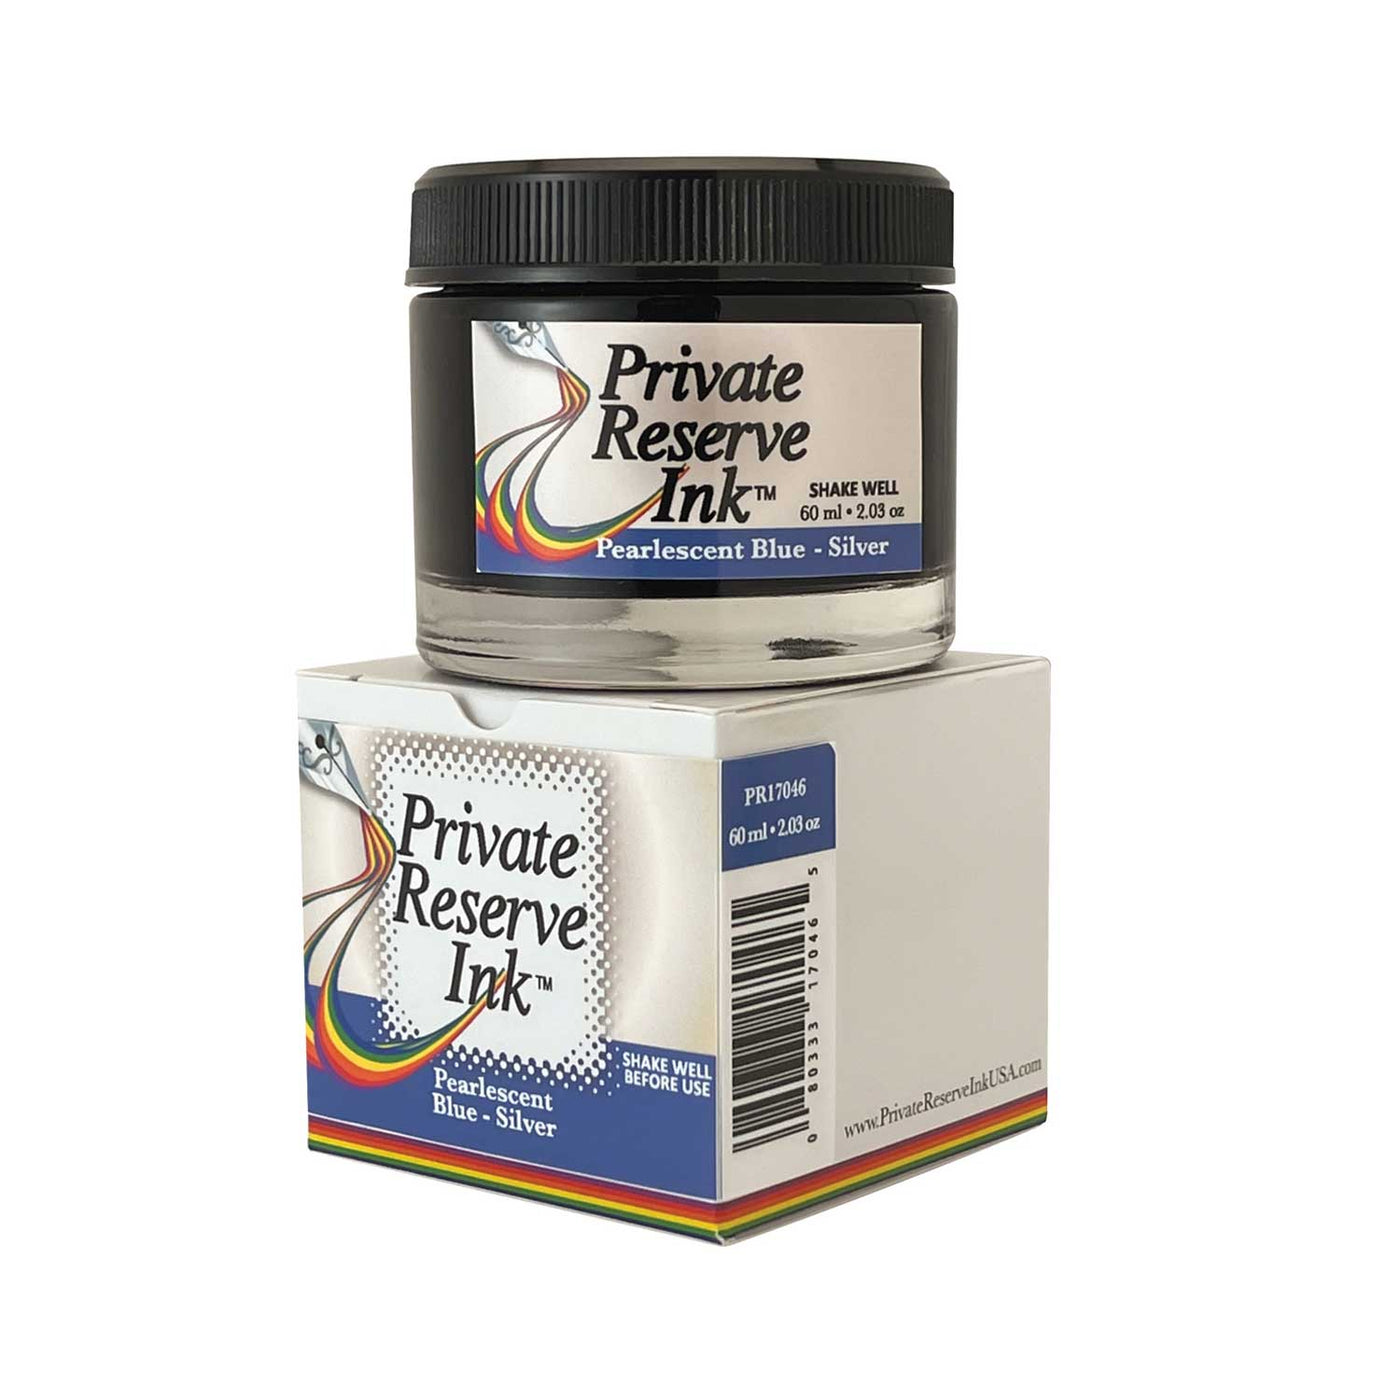 Private Reserve Pearlescent Blue Silver Ink Bottle - 60ml 2